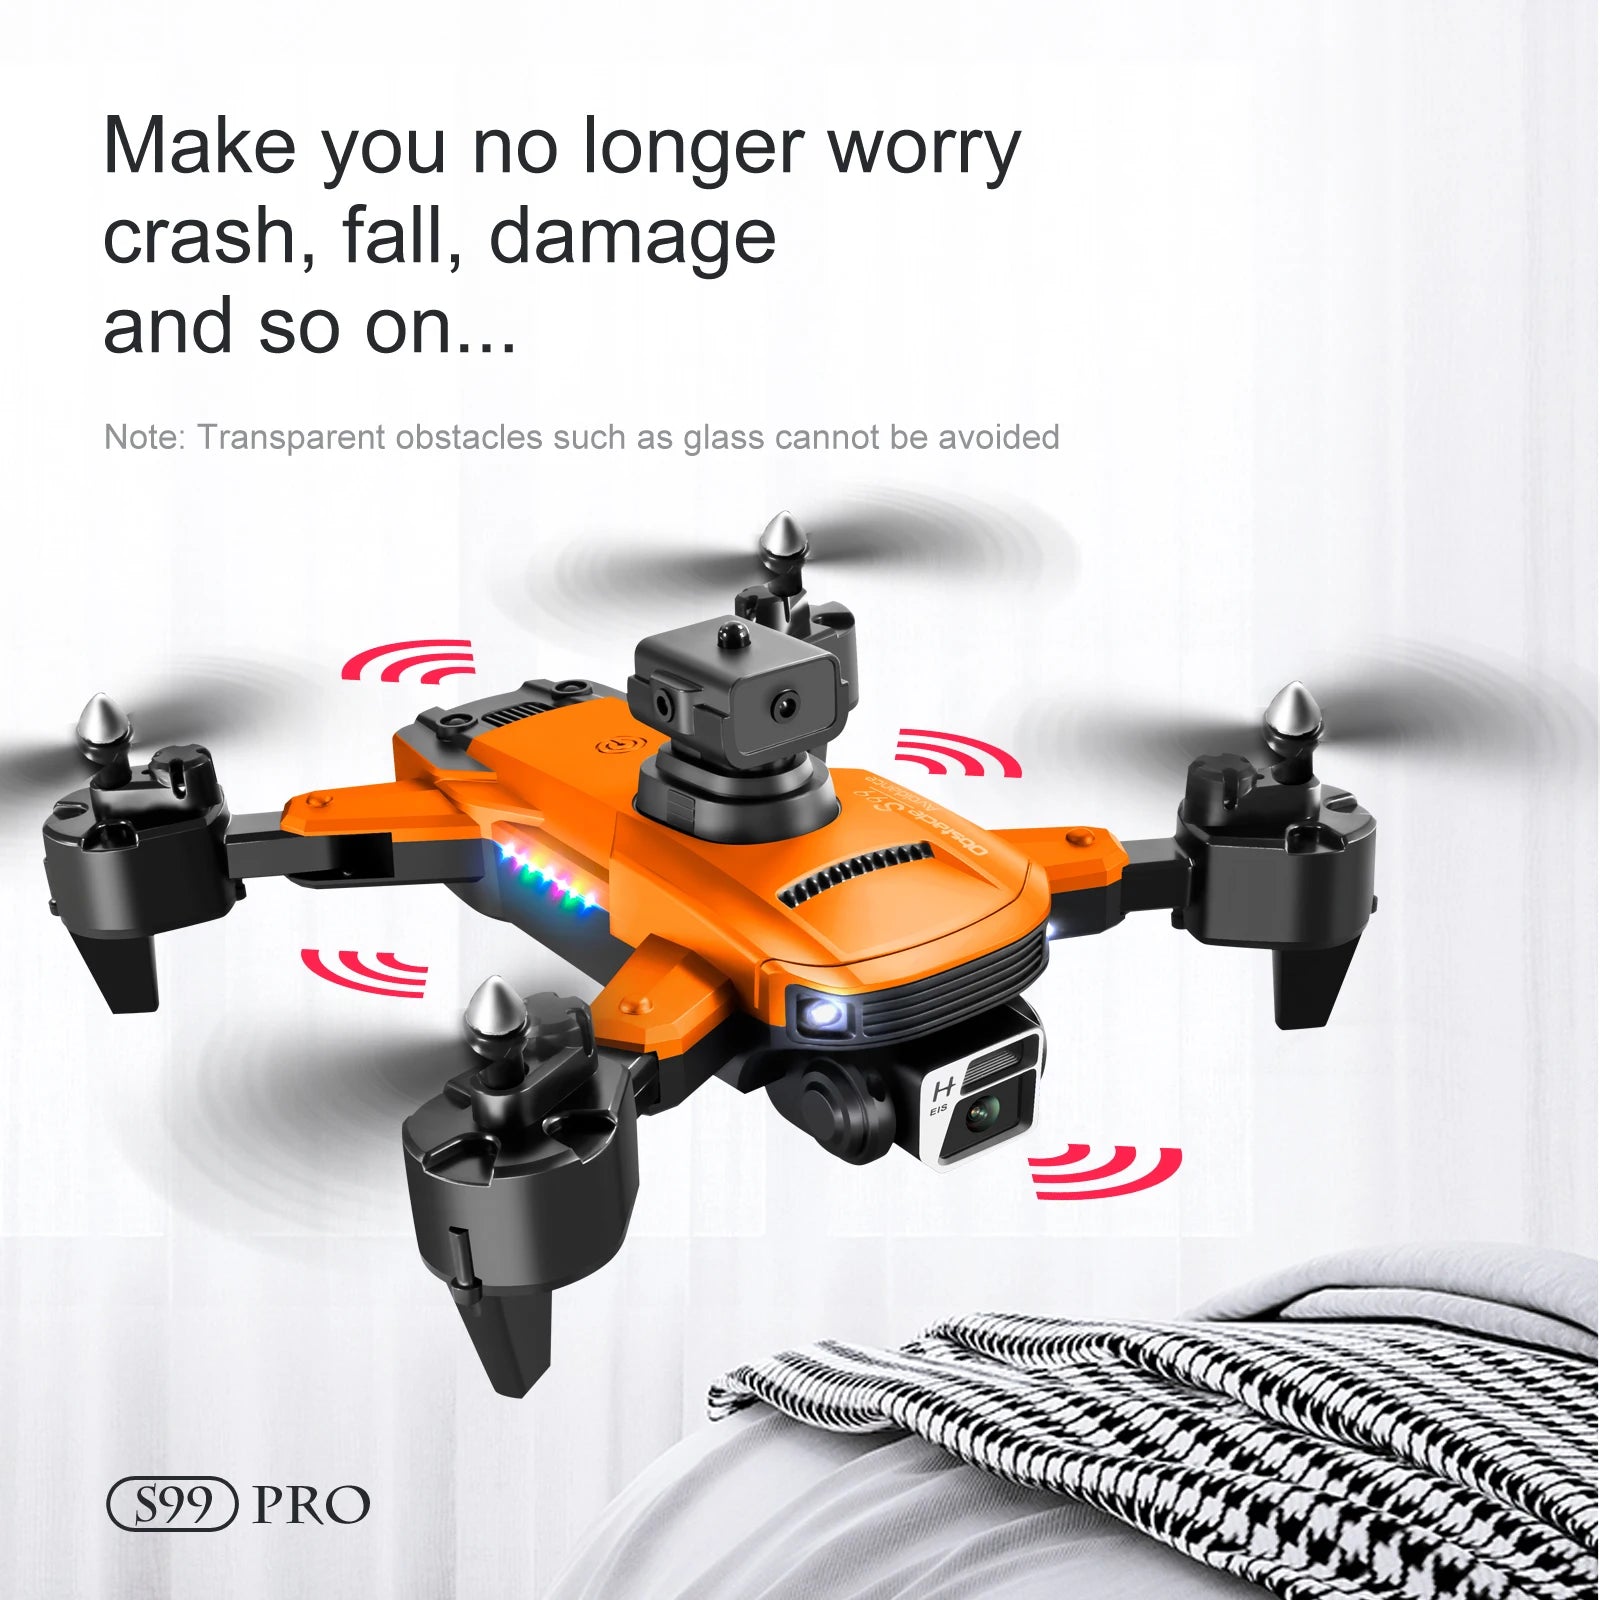 S99 Drone, eis s99 pro 1622so is a